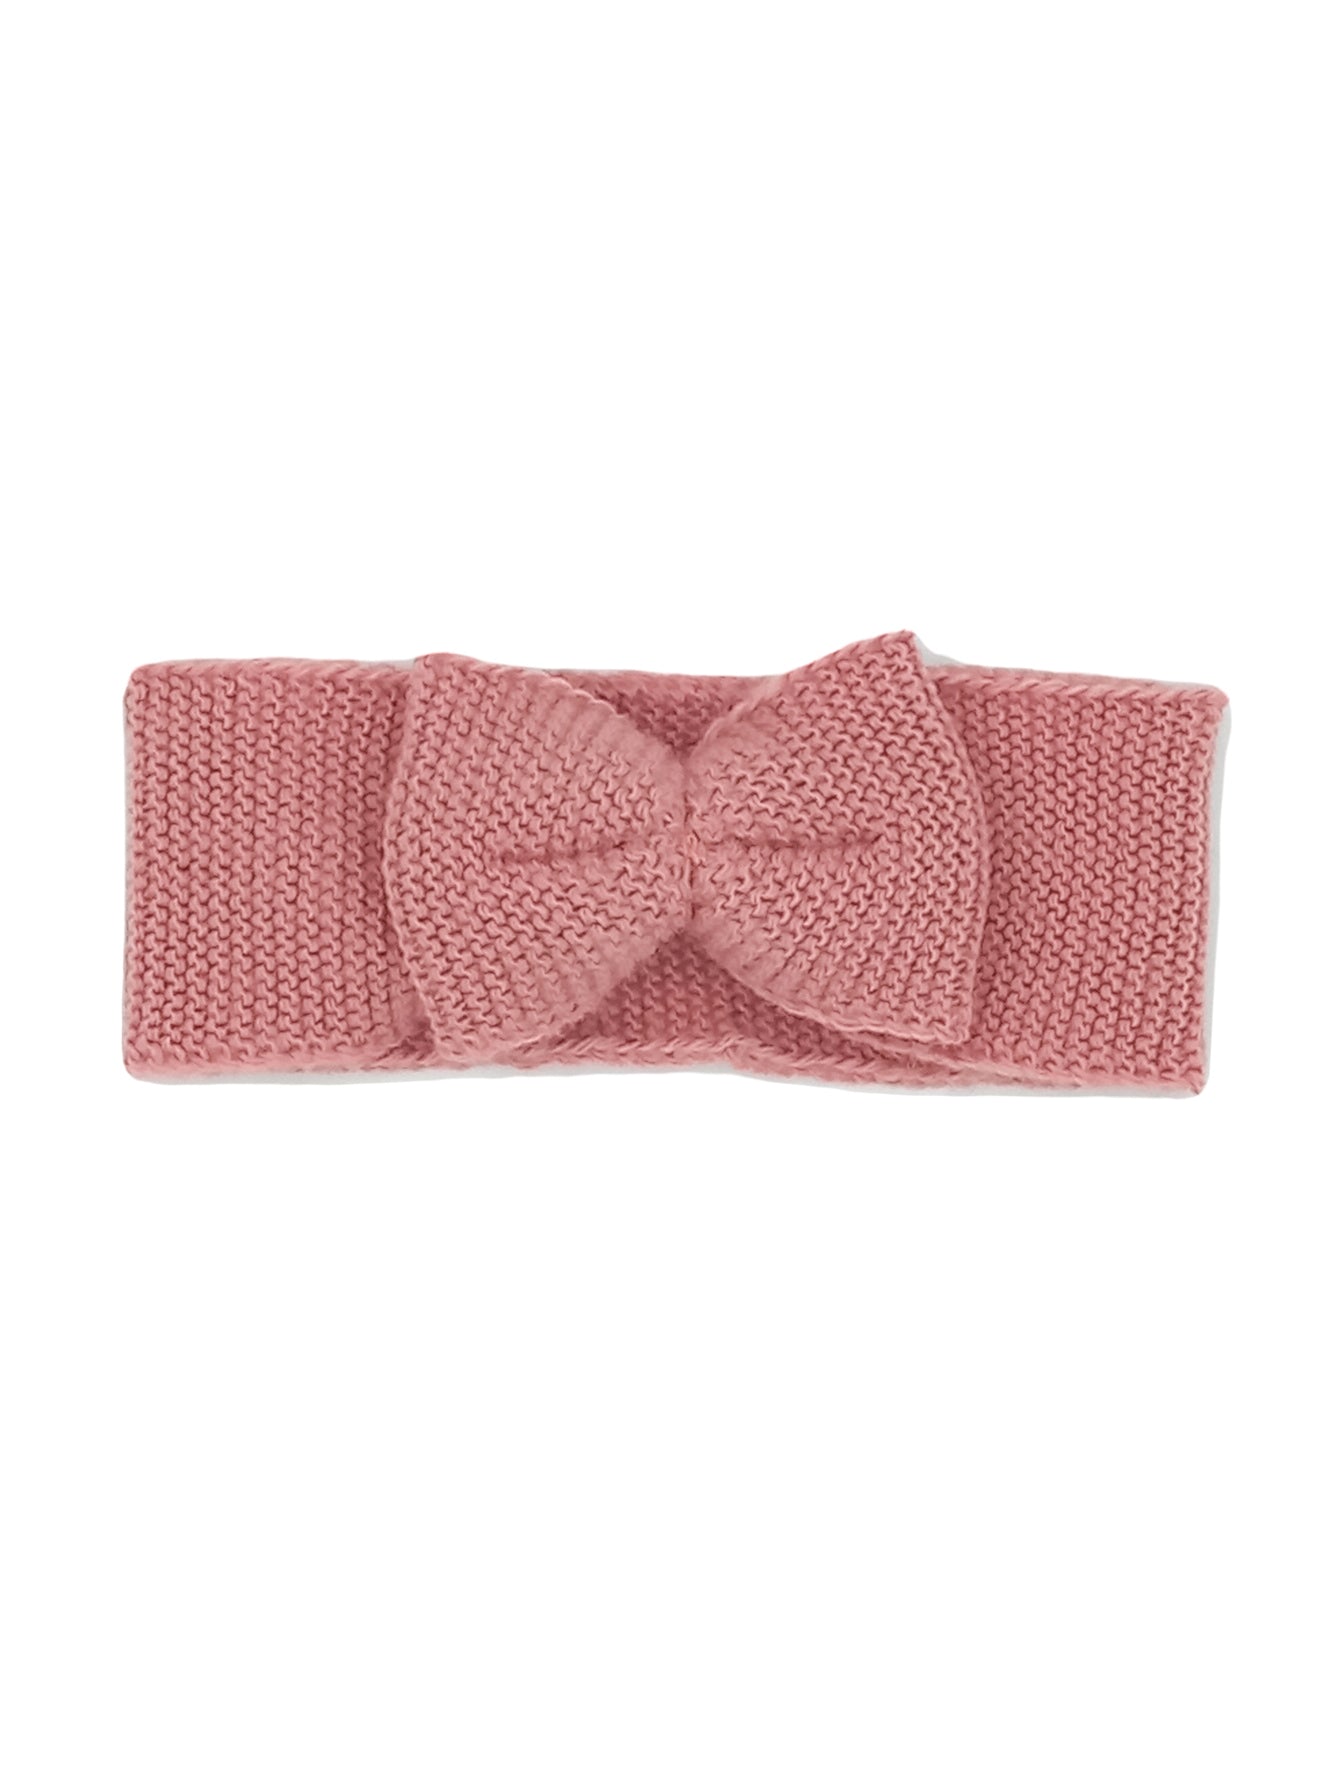 Knitted Headband With Bow, Rose Headband La Manufacture de Layette 